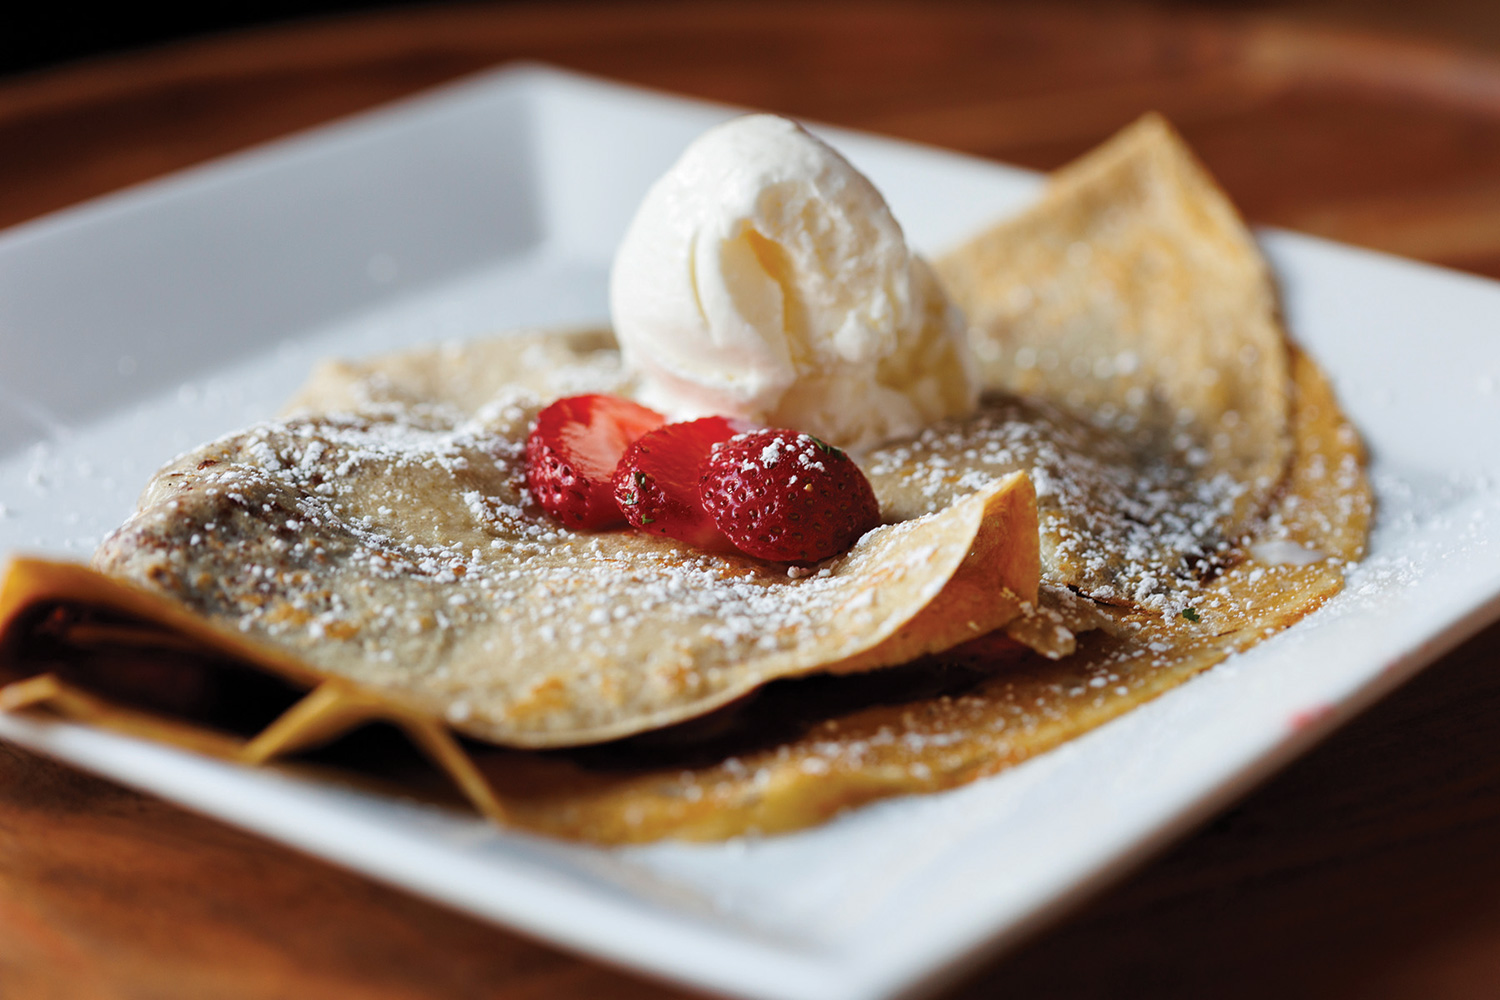 Tempting sweet and savory crepes are gluten free.